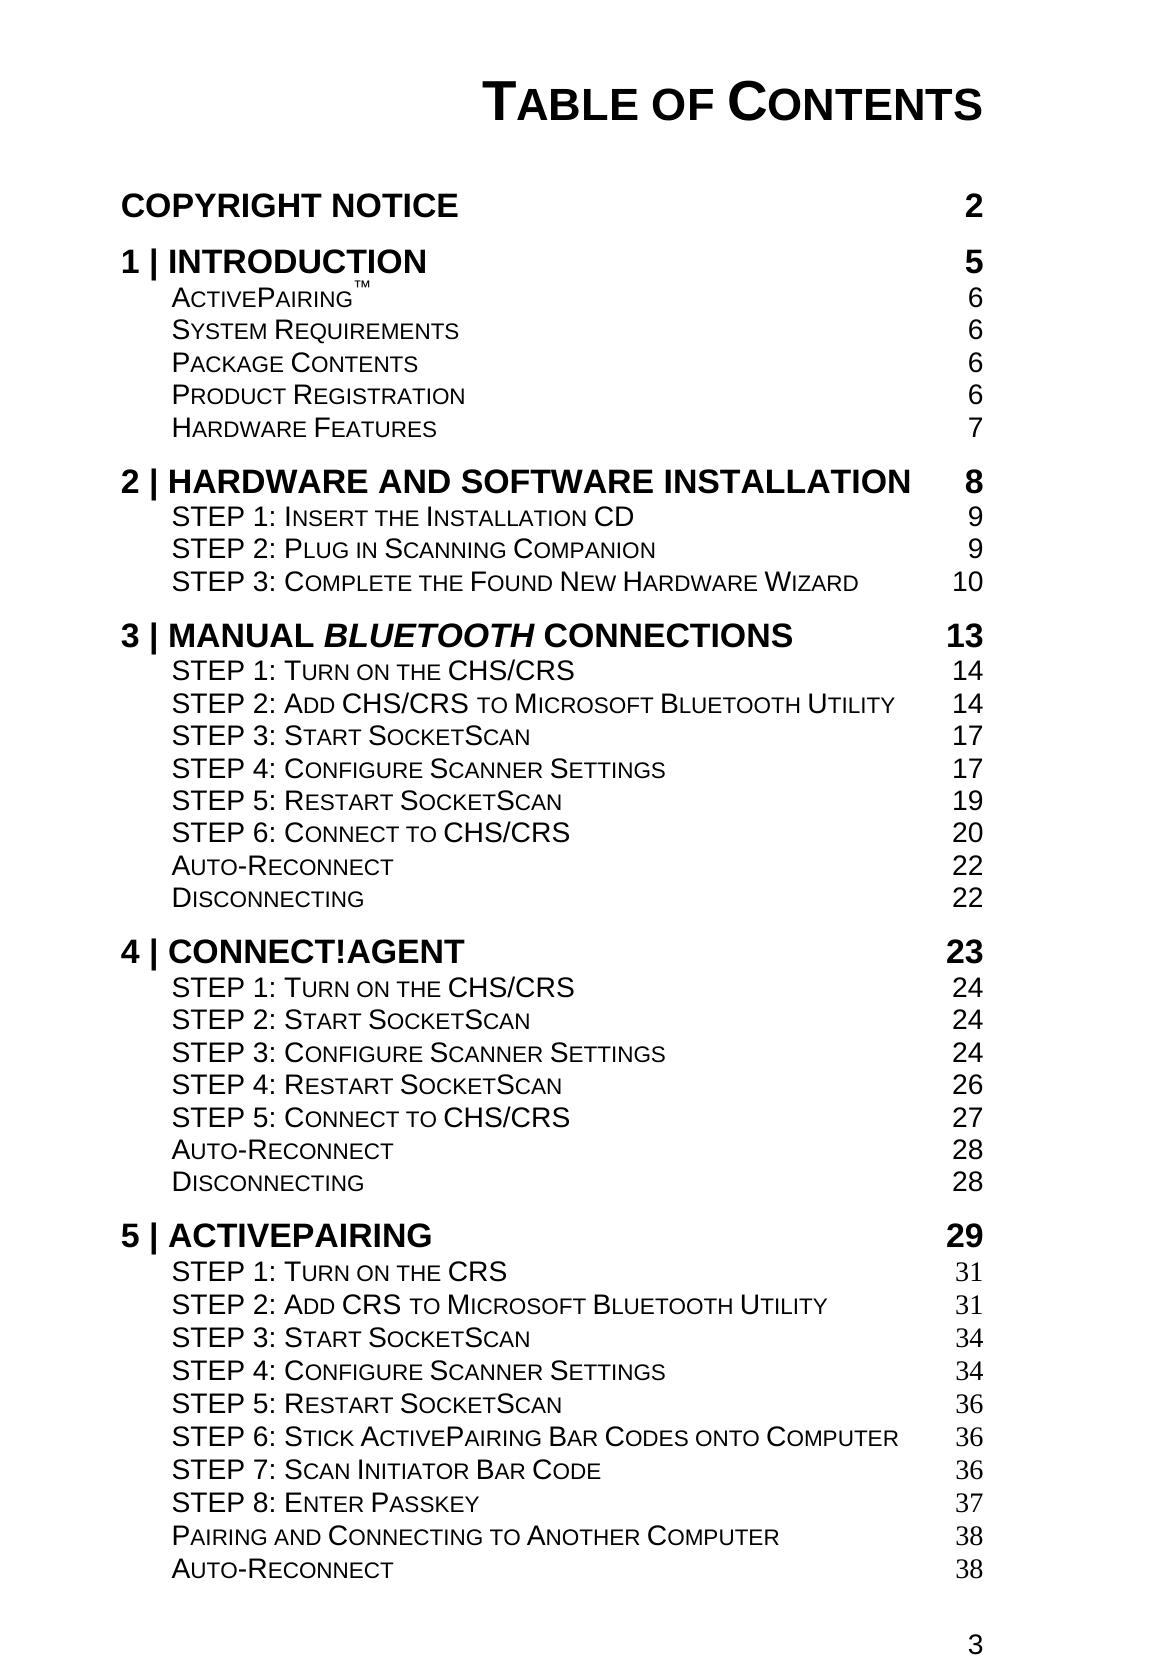 3 TABLE OF CONTENTS  COPYRIGHT NOTICE  2 1 | INTRODUCTION  5 ACTIVEPAIRING™ 6 SYSTEM REQUIREMENTS 6 PACKAGE CONTENTS 6 PRODUCT REGISTRATION 6 HARDWARE FEATURES 7 2 | HARDWARE AND SOFTWARE INSTALLATION  8 STEP 1: INSERT THE INSTALLATION CD 9 STEP 2: PLUG IN SCANNING COMPANION 9 STEP 3: COMPLETE THE FOUND NEW HARDWARE WIZARD 10 3 | MANUAL BLUETOOTH CONNECTIONS  13 STEP 1: TURN ON THE CHS/CRS 14 STEP 2: ADD CHS/CRS TO MICROSOFT BLUETOOTH UTILITY 14 STEP 3: START SOCKETSCAN 17 STEP 4: CONFIGURE SCANNER SETTINGS 17 STEP 5: RESTART SOCKETSCAN 19 STEP 6: CONNECT TO CHS/CRS 20 AUTO-RECONNECT 22 DISCONNECTING 22 4 | CONNECT!AGENT  23 STEP 1: TURN ON THE CHS/CRS 24 STEP 2: START SOCKETSCAN 24 STEP 3: CONFIGURE SCANNER SETTINGS 24 STEP 4: RESTART SOCKETSCAN 26 STEP 5: CONNECT TO CHS/CRS 27 AUTO-RECONNECT 28 DISCONNECTING 28 5 | ACTIVEPAIRING  29 STEP 1: TURN ON THE CRS 31 STEP 2: ADD CRS TO MICROSOFT BLUETOOTH UTILITY 31 STEP 3: START SOCKETSCAN 34 STEP 4: CONFIGURE SCANNER SETTINGS 34 STEP 5: RESTART SOCKETSCAN 36 STEP 6: STICK ACTIVEPAIRING BAR CODES ONTO COMPUTER 36 STEP 7: SCAN INITIATOR BAR CODE 36 STEP 8: ENTER PASSKEY 37 PAIRING AND CONNECTING TO ANOTHER COMPUTER 38 AUTO-RECONNECT 38 